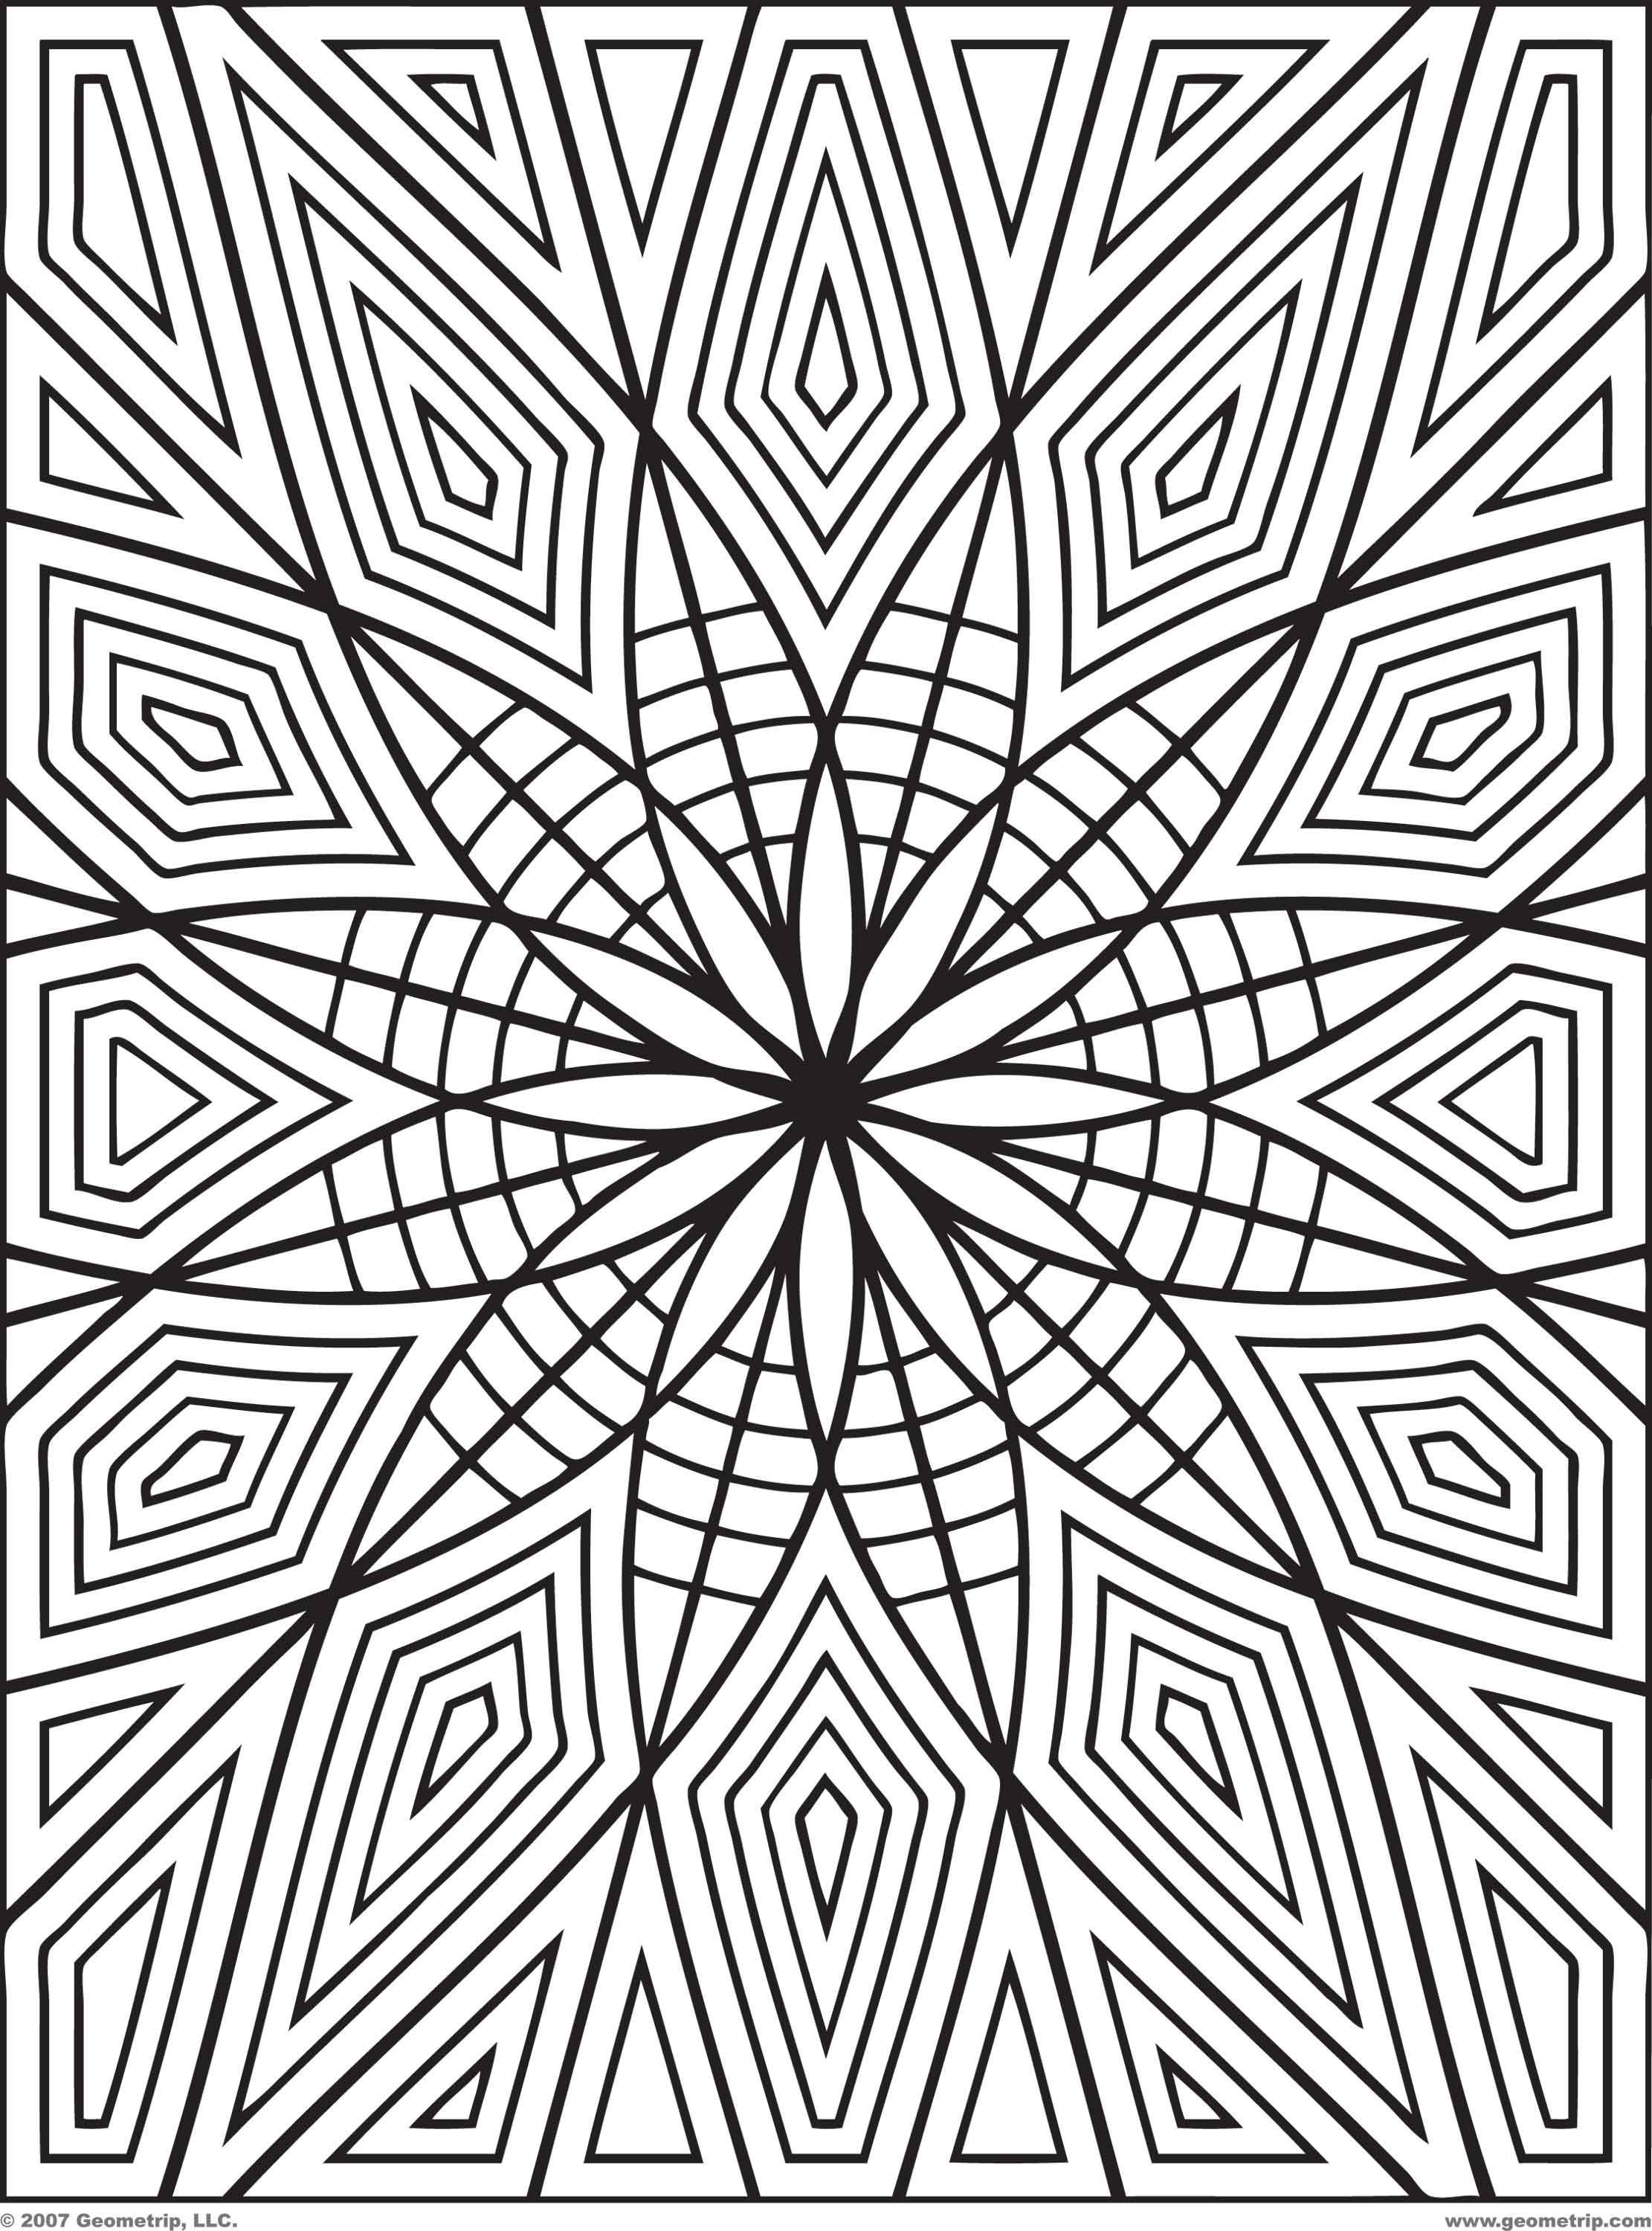 Geometric Design Coloring Pages, trippy geometric Colouring Pages ...